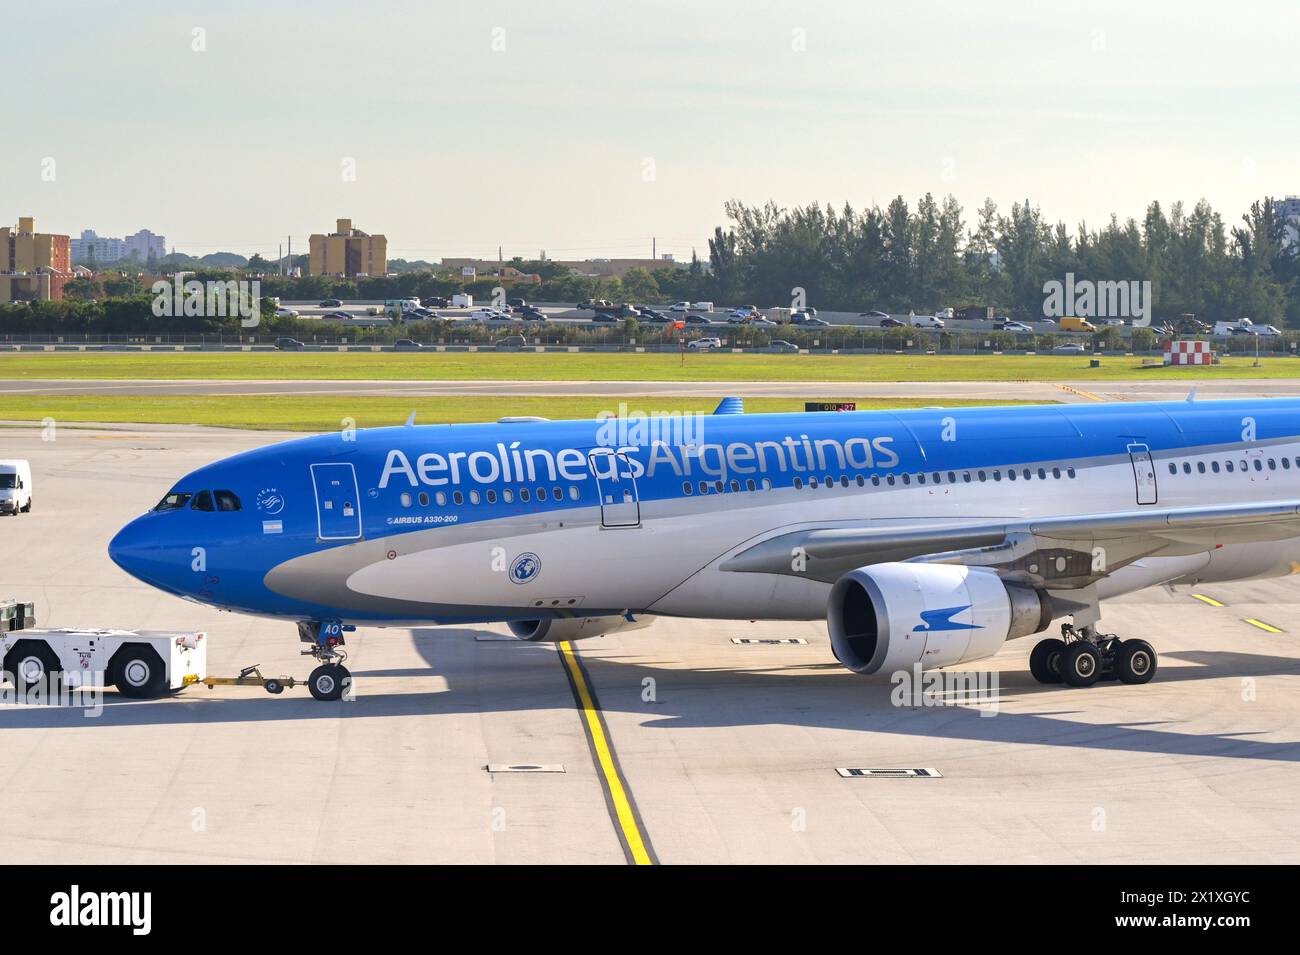 Miami, Florida, USA - 5 December 2023: Airbus A330 jet operated by Aerolineas Argentinas being towed to one of the terminals at Miami airport Stock Photo